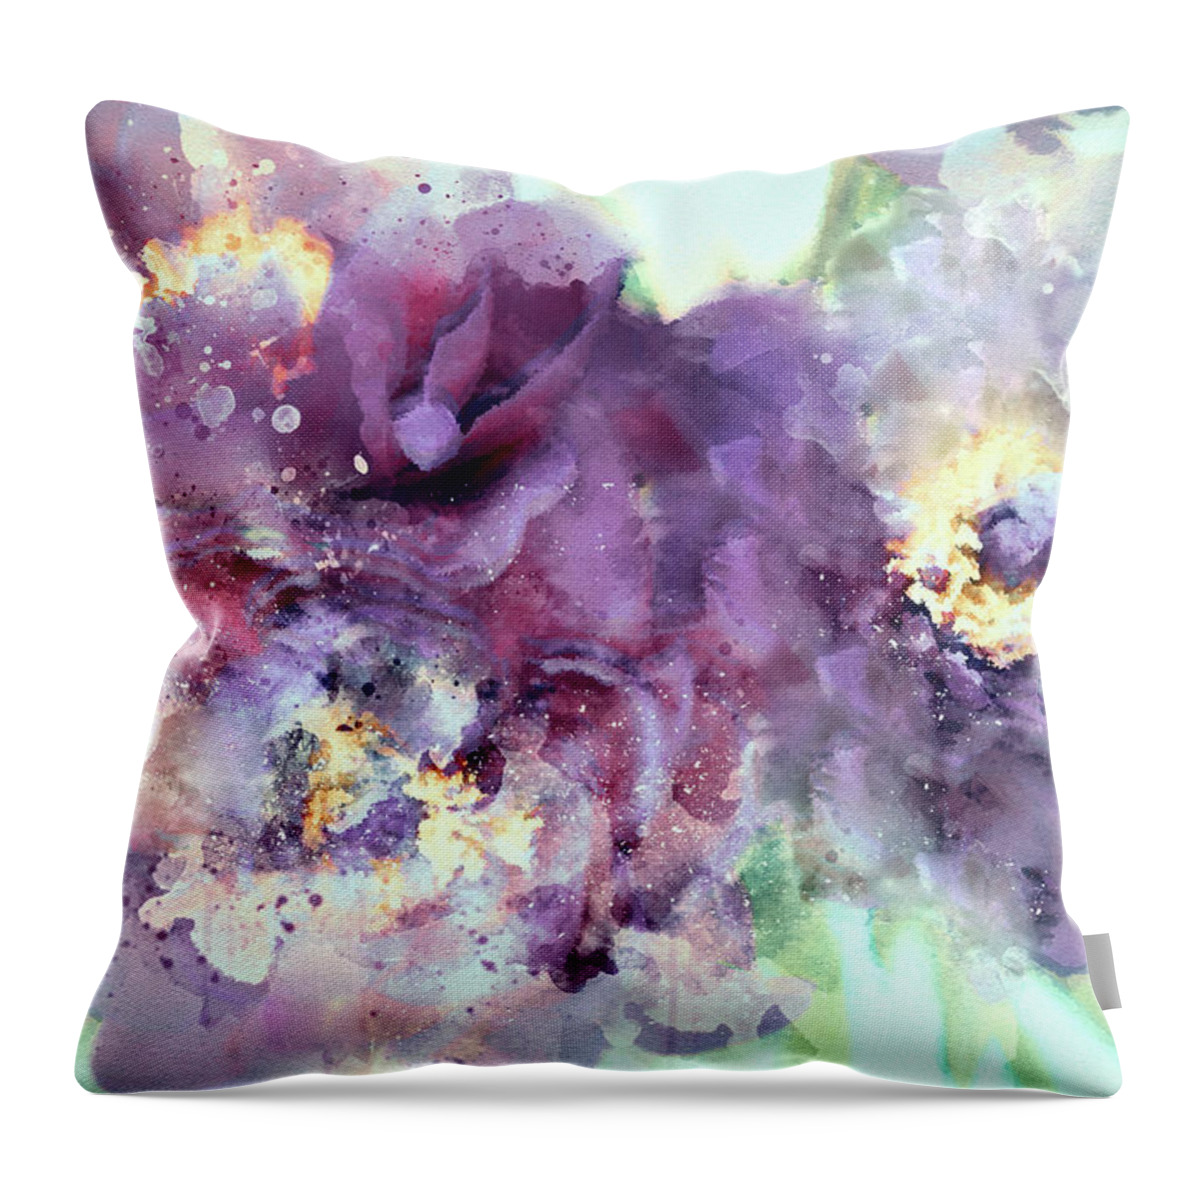 Dusty Purple Camellias In Watercolor Throw Pillow featuring the digital art Dusty Purple Camellias in Watercolor by Susan Maxwell Schmidt